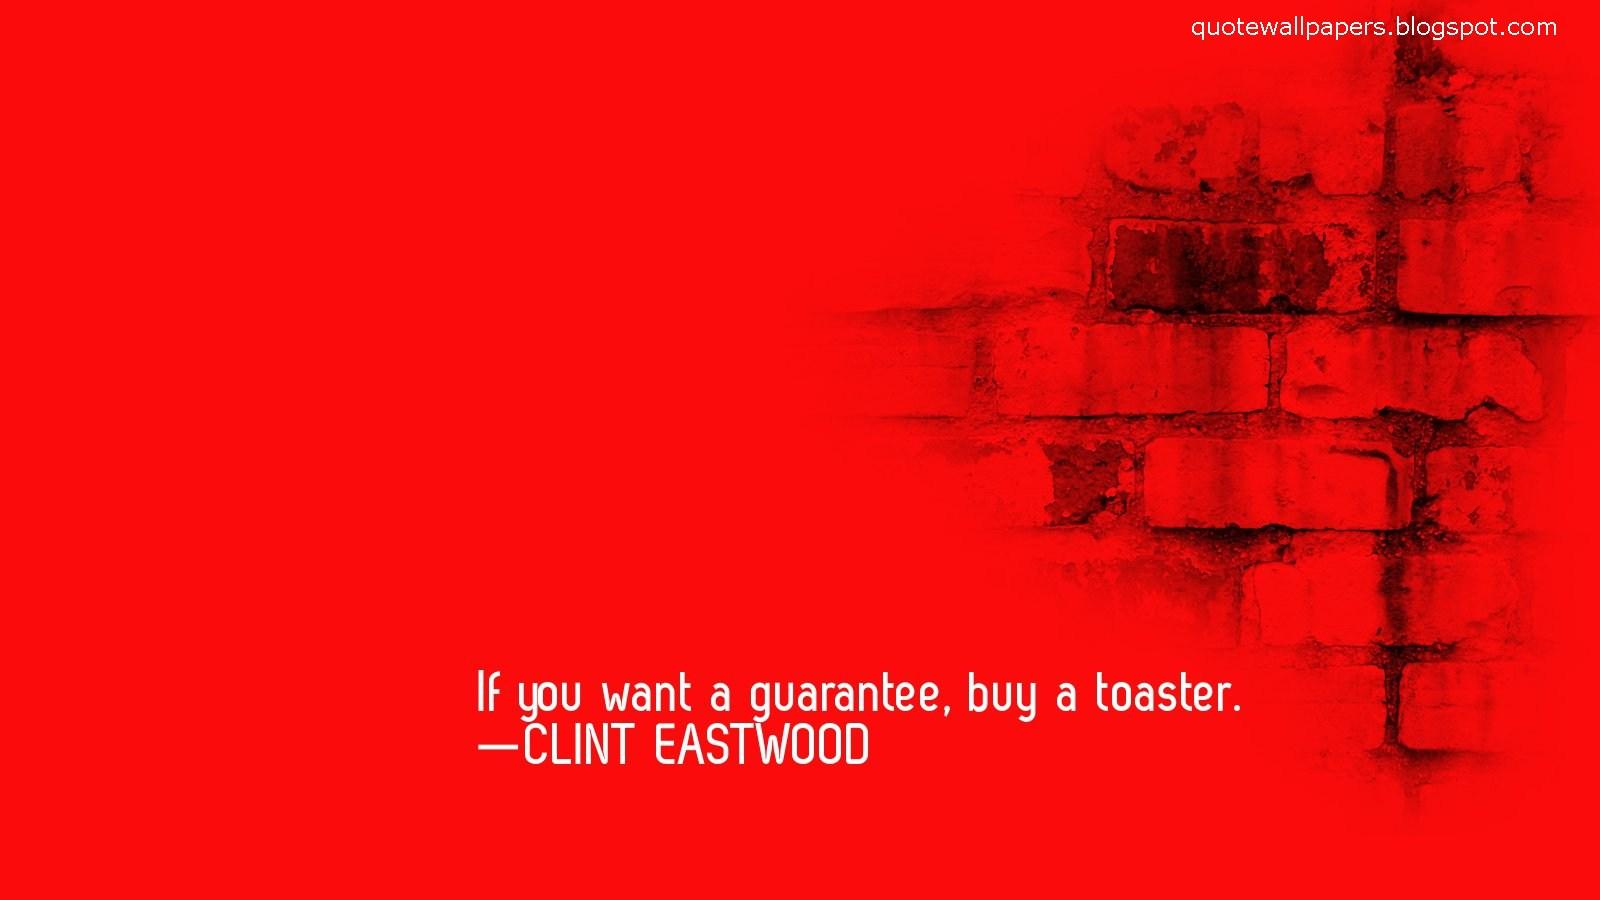 If you want a guarantee, buy a toaster —CLINT EASTWOOD